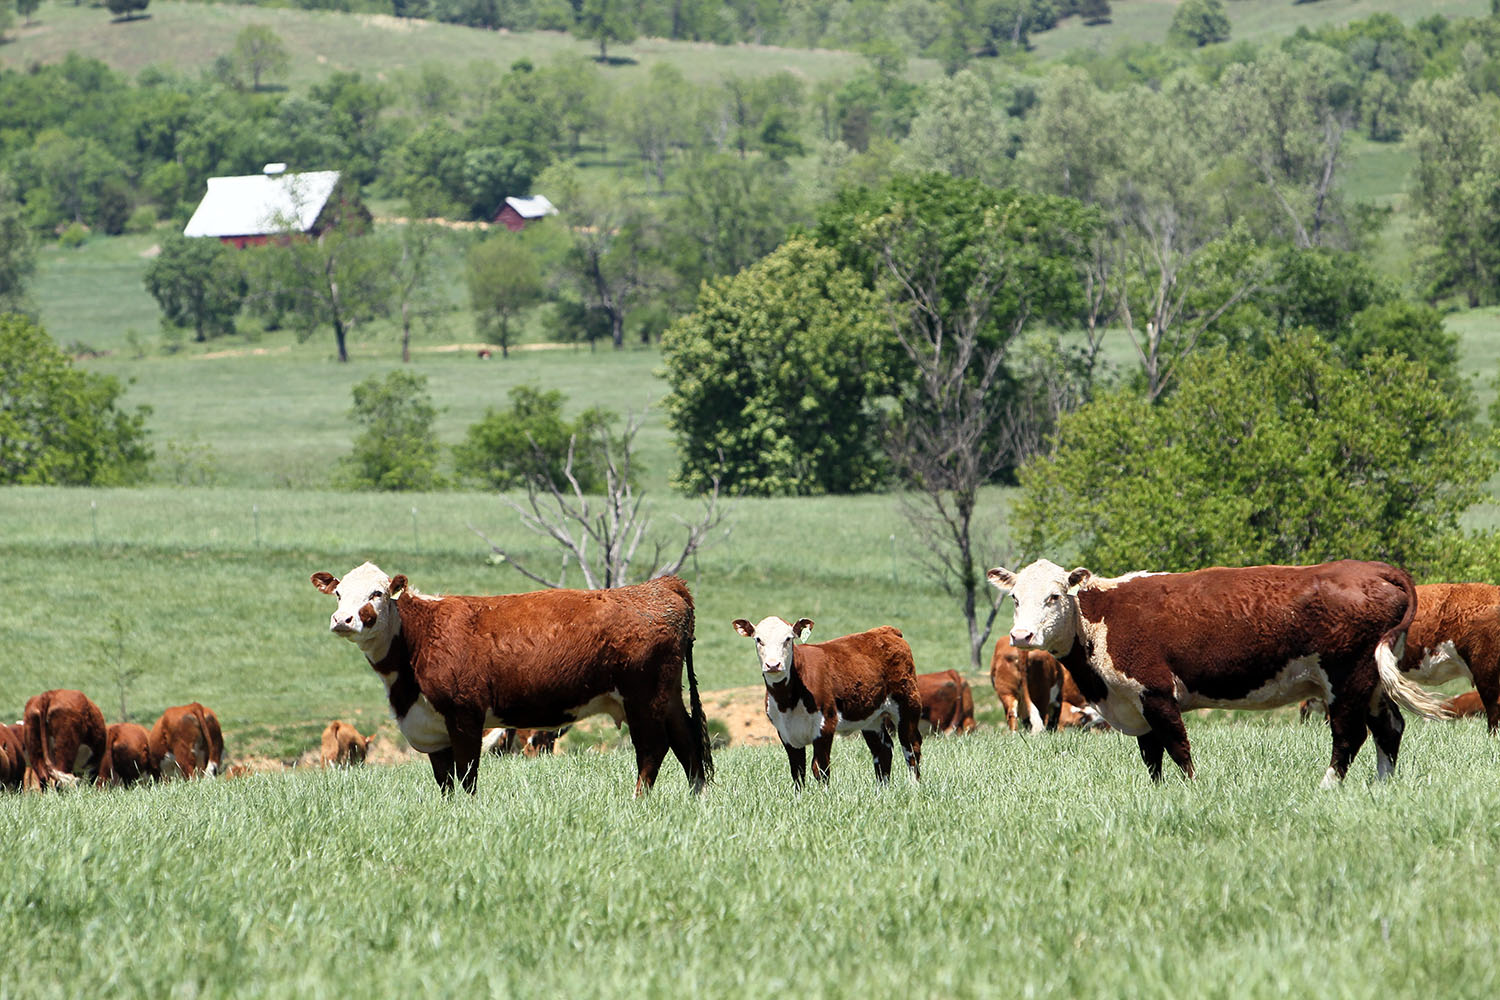 A herd of hereford cattle stand in a field surrounded by trees and ranch buildings.